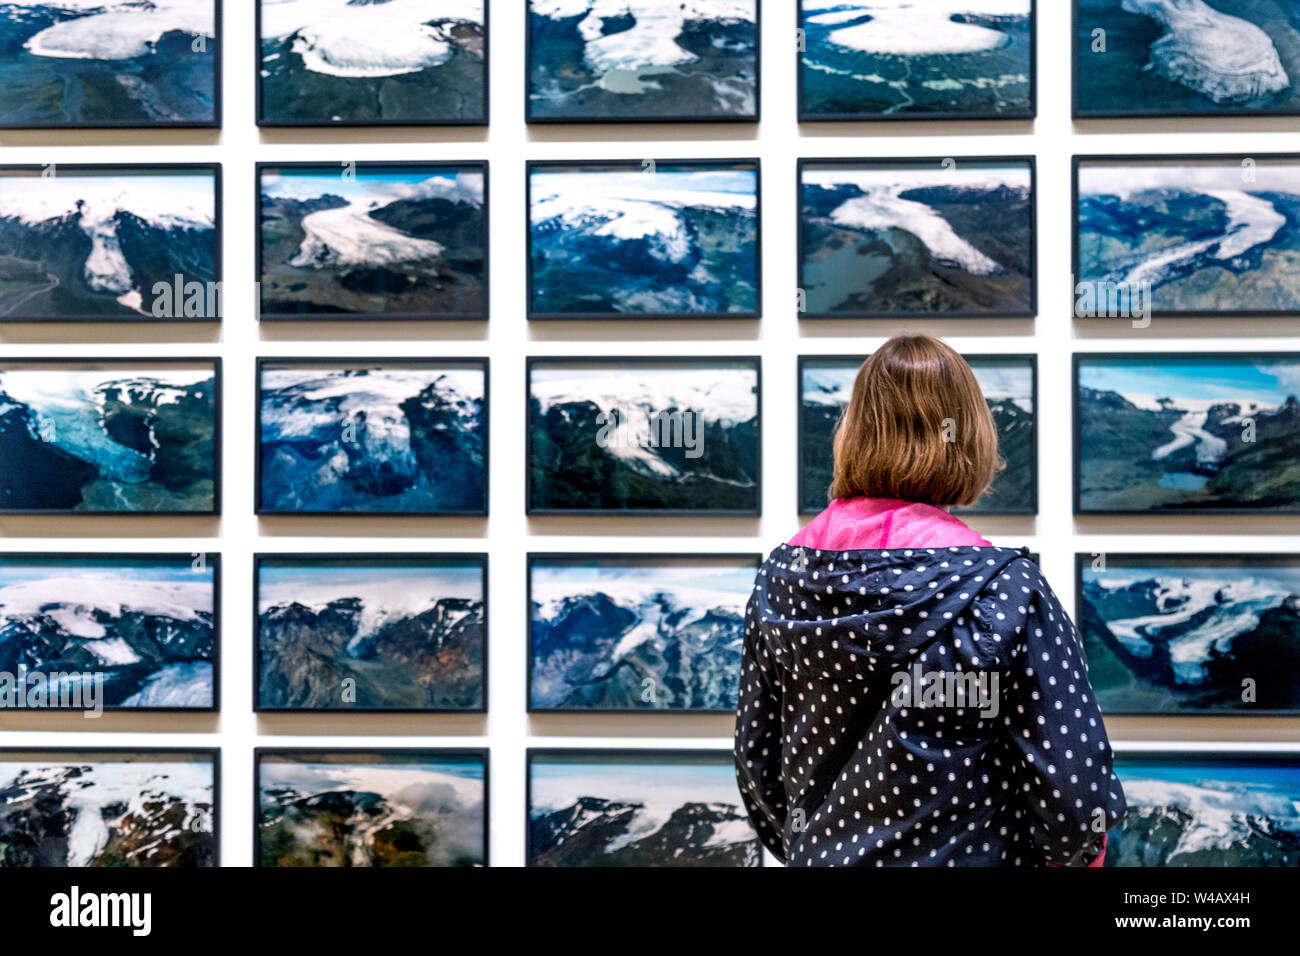 Woman looking at The Glacier Series, 1999, Olafur Eliasson 'In Real Life' 2019 exhibition at the Tate Modern, London, UK Stock Photo